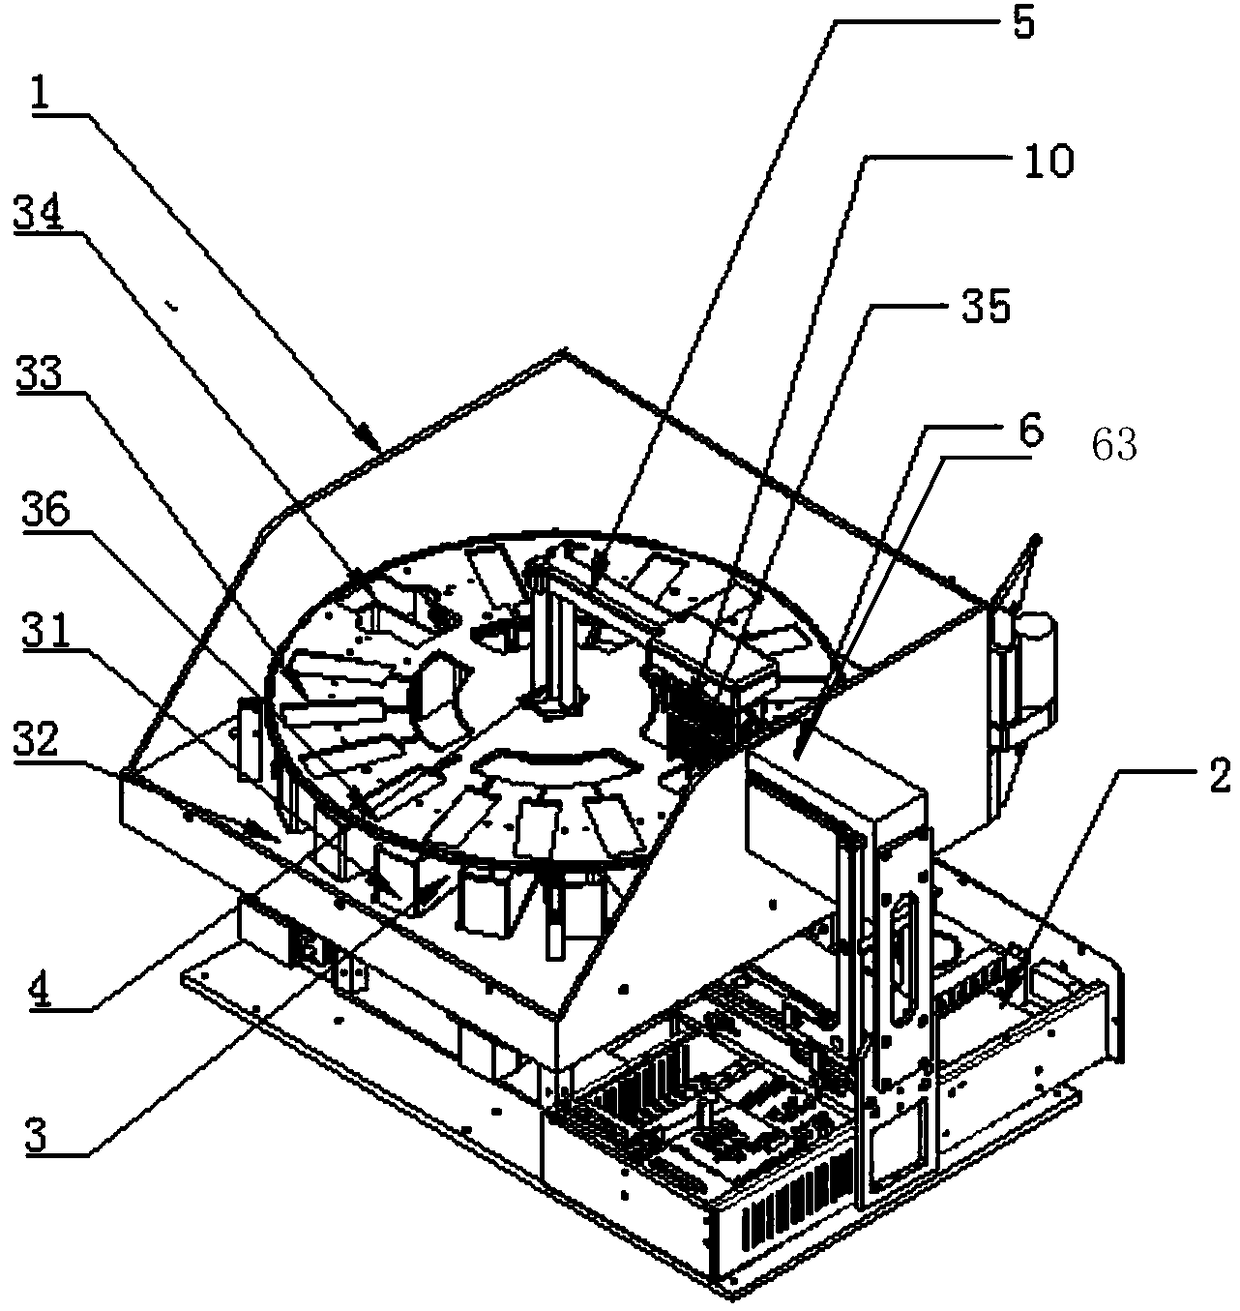 Cell smear dyeing machine structure